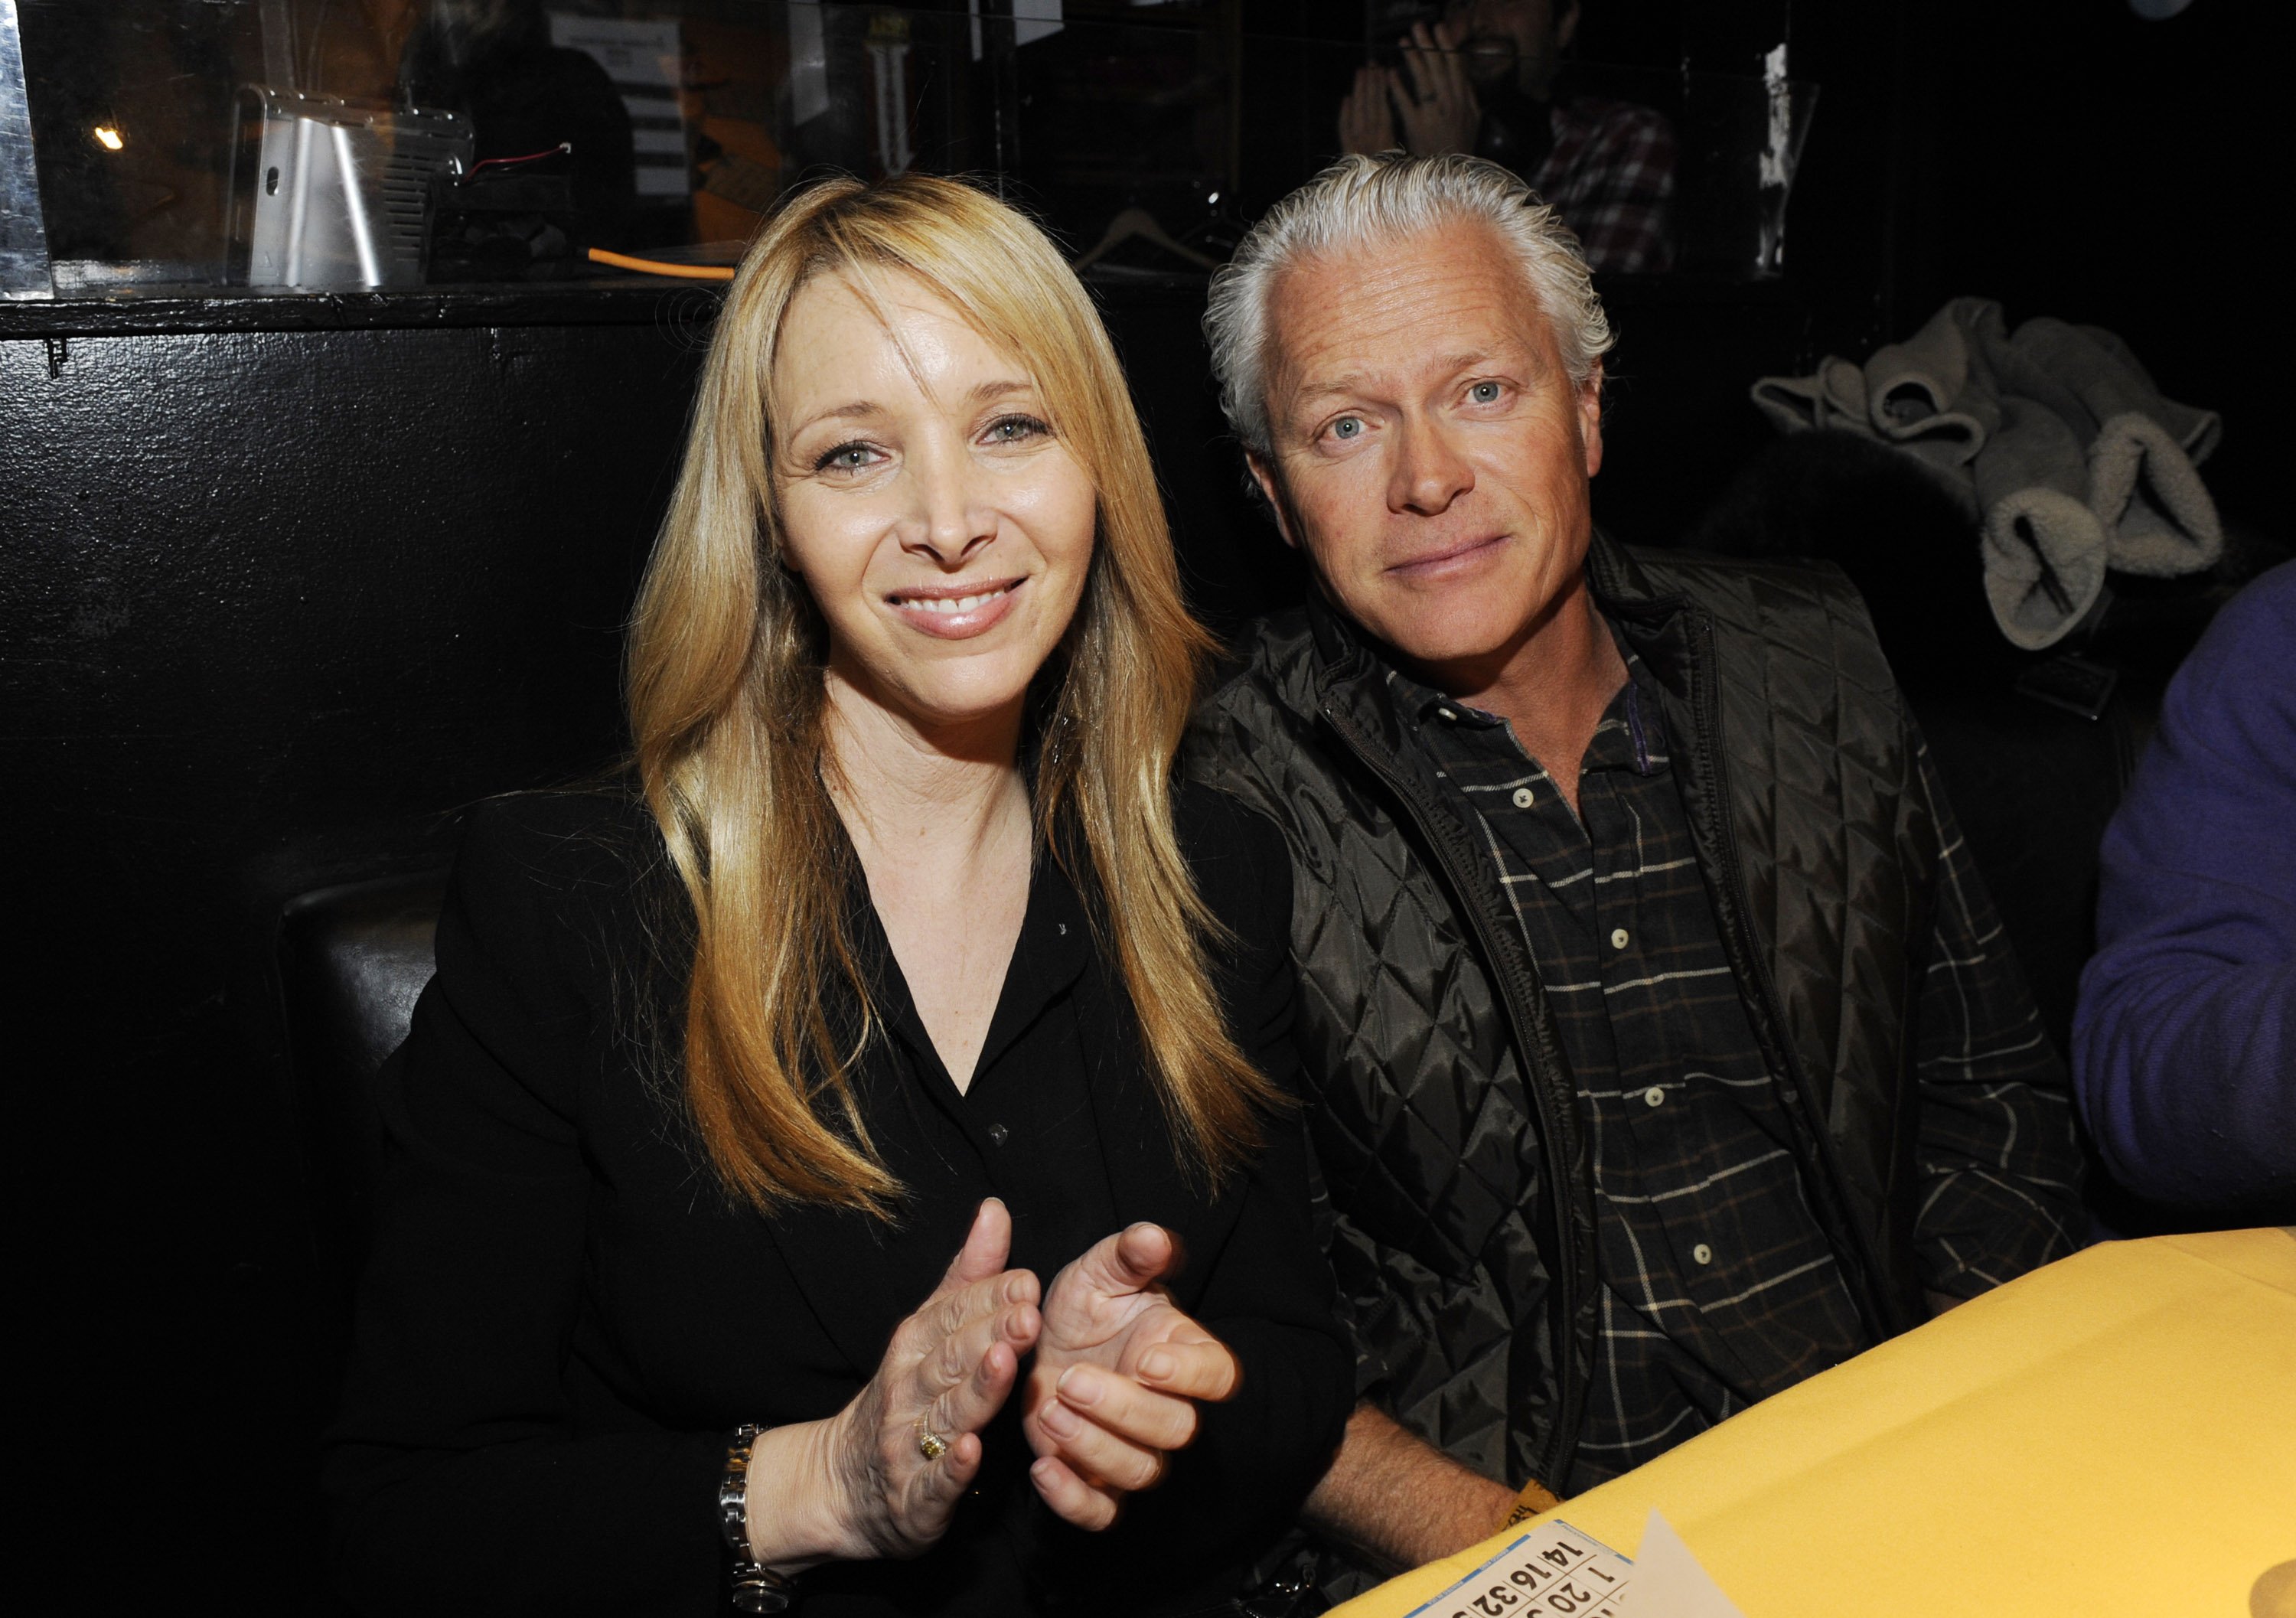 Michel Stern and Lisa Kudrow playing Bingo at The Roxy Theatre on March 7, 2012, in West Hollywood. |  Source: Getty Images